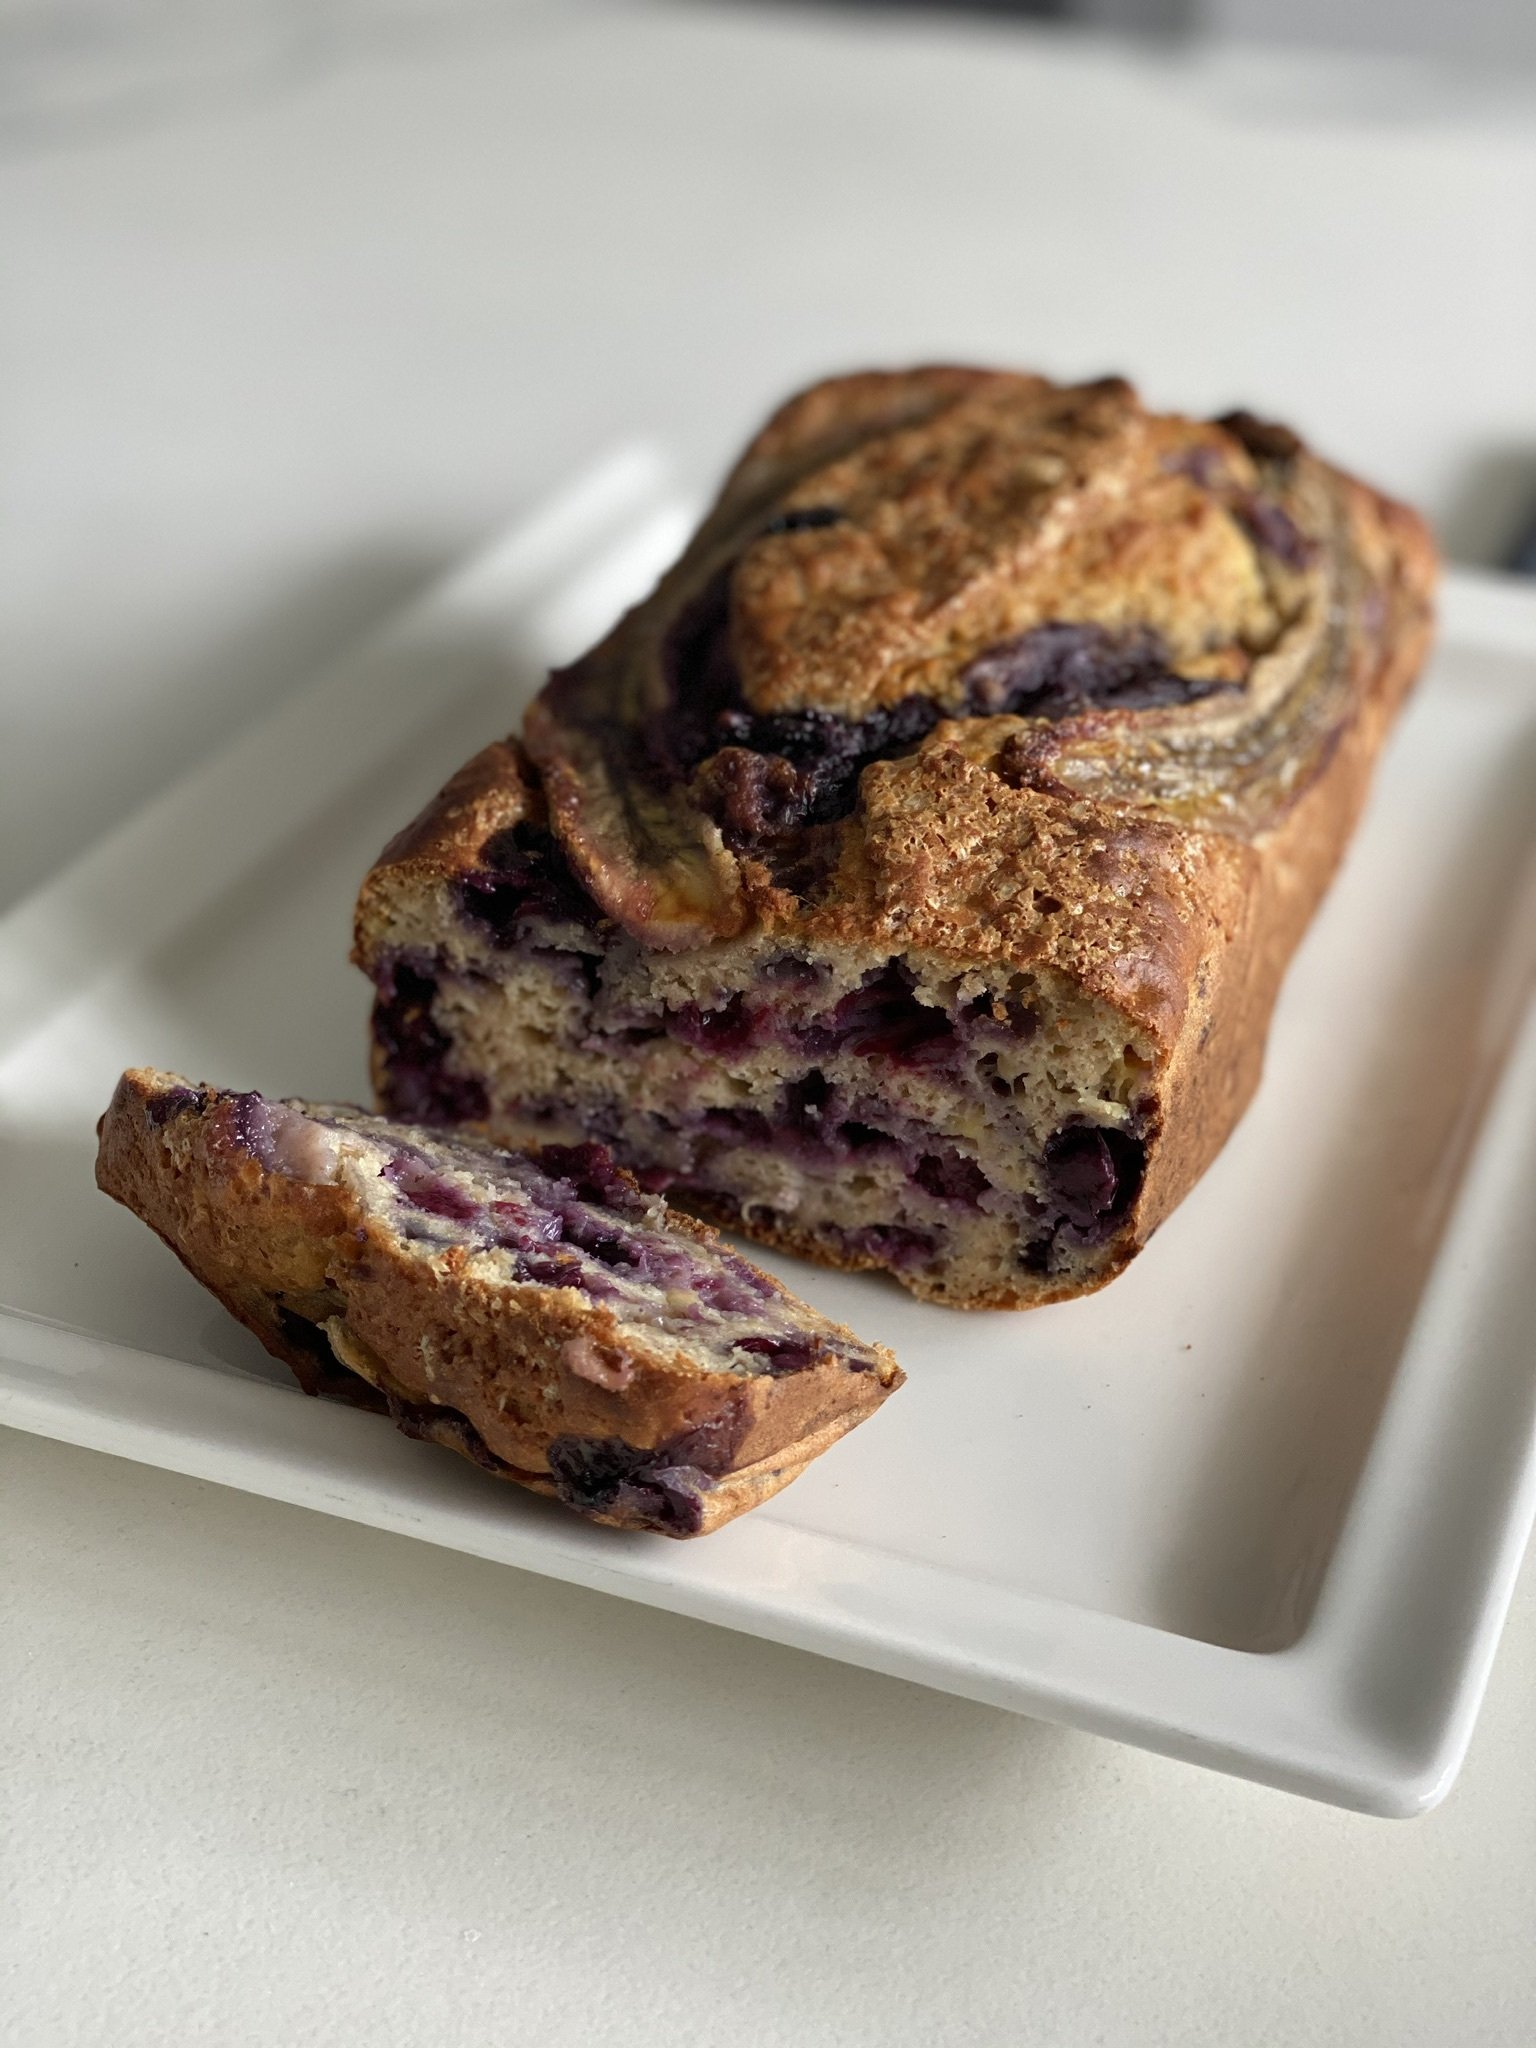 Banana bread with Blueberries